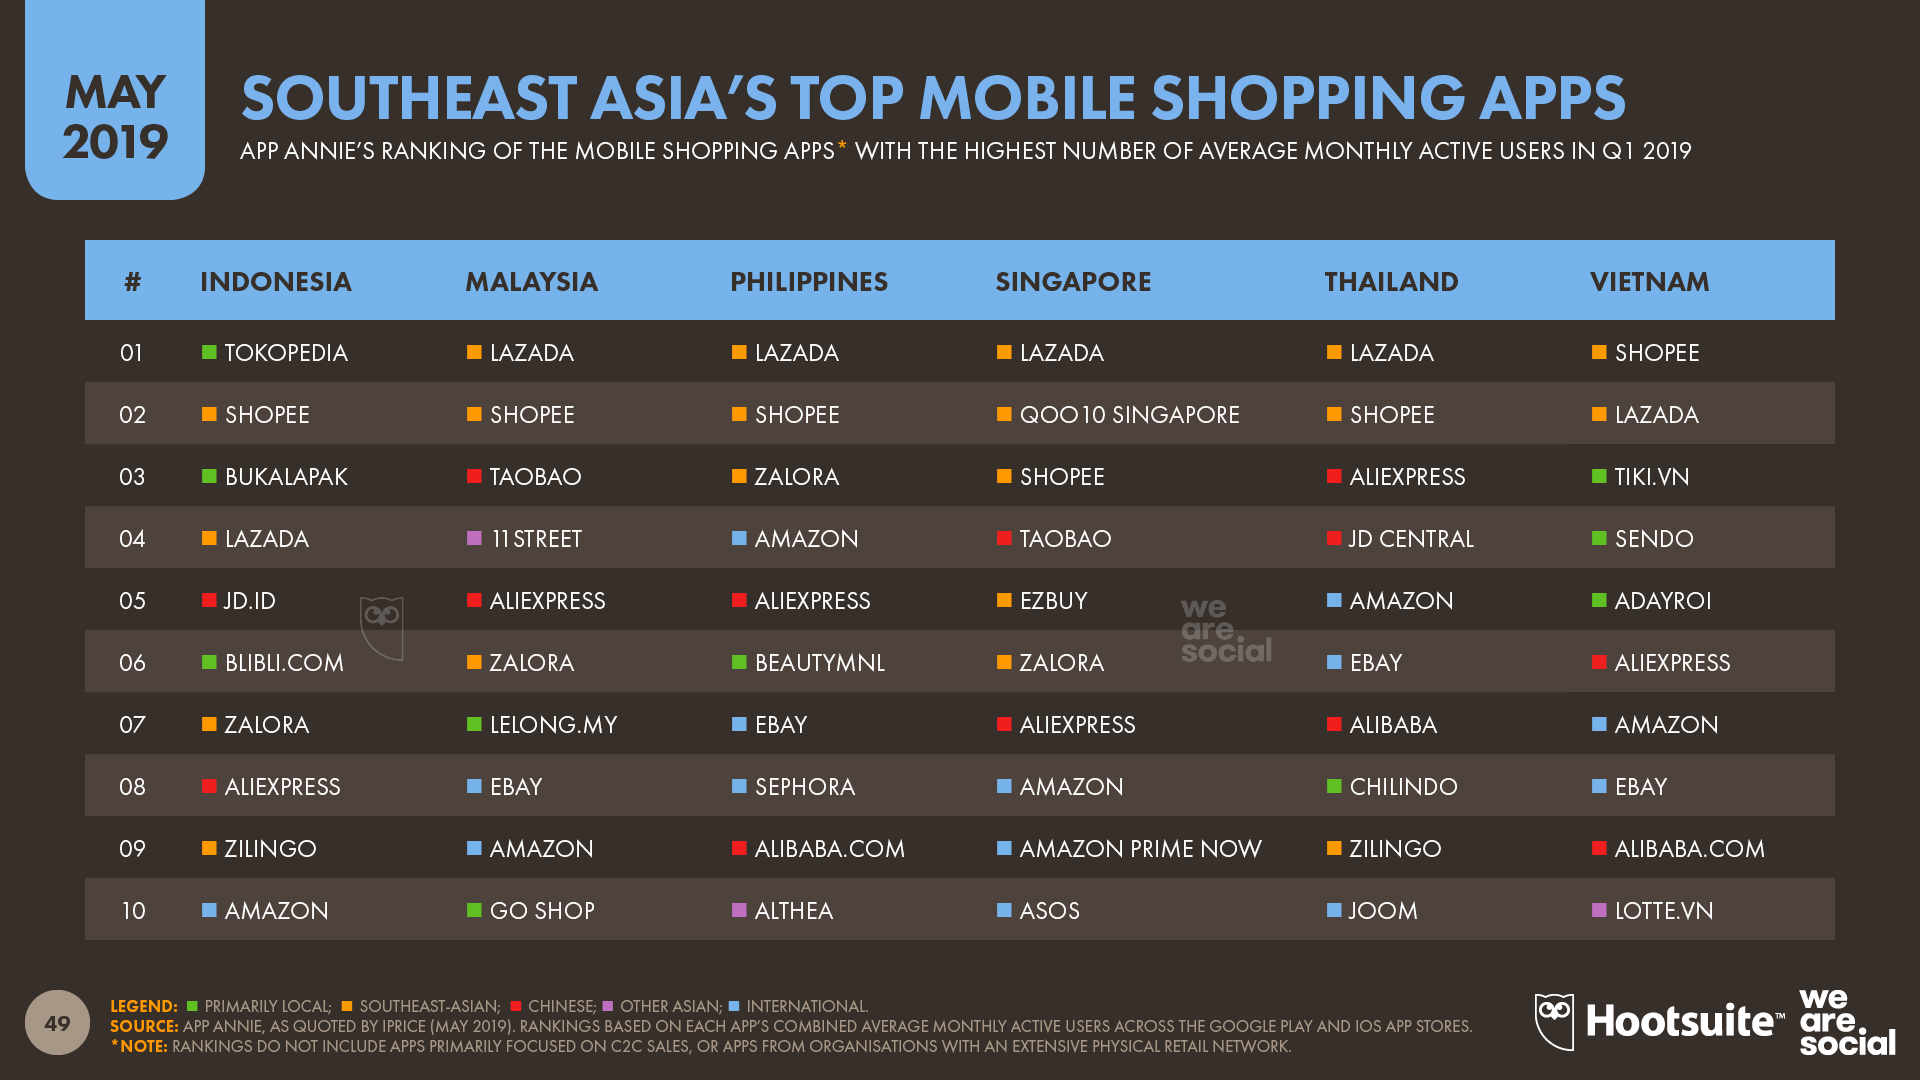 Sop Mobile Shopping Apps in Southeast Asia May 2019 DataReportal